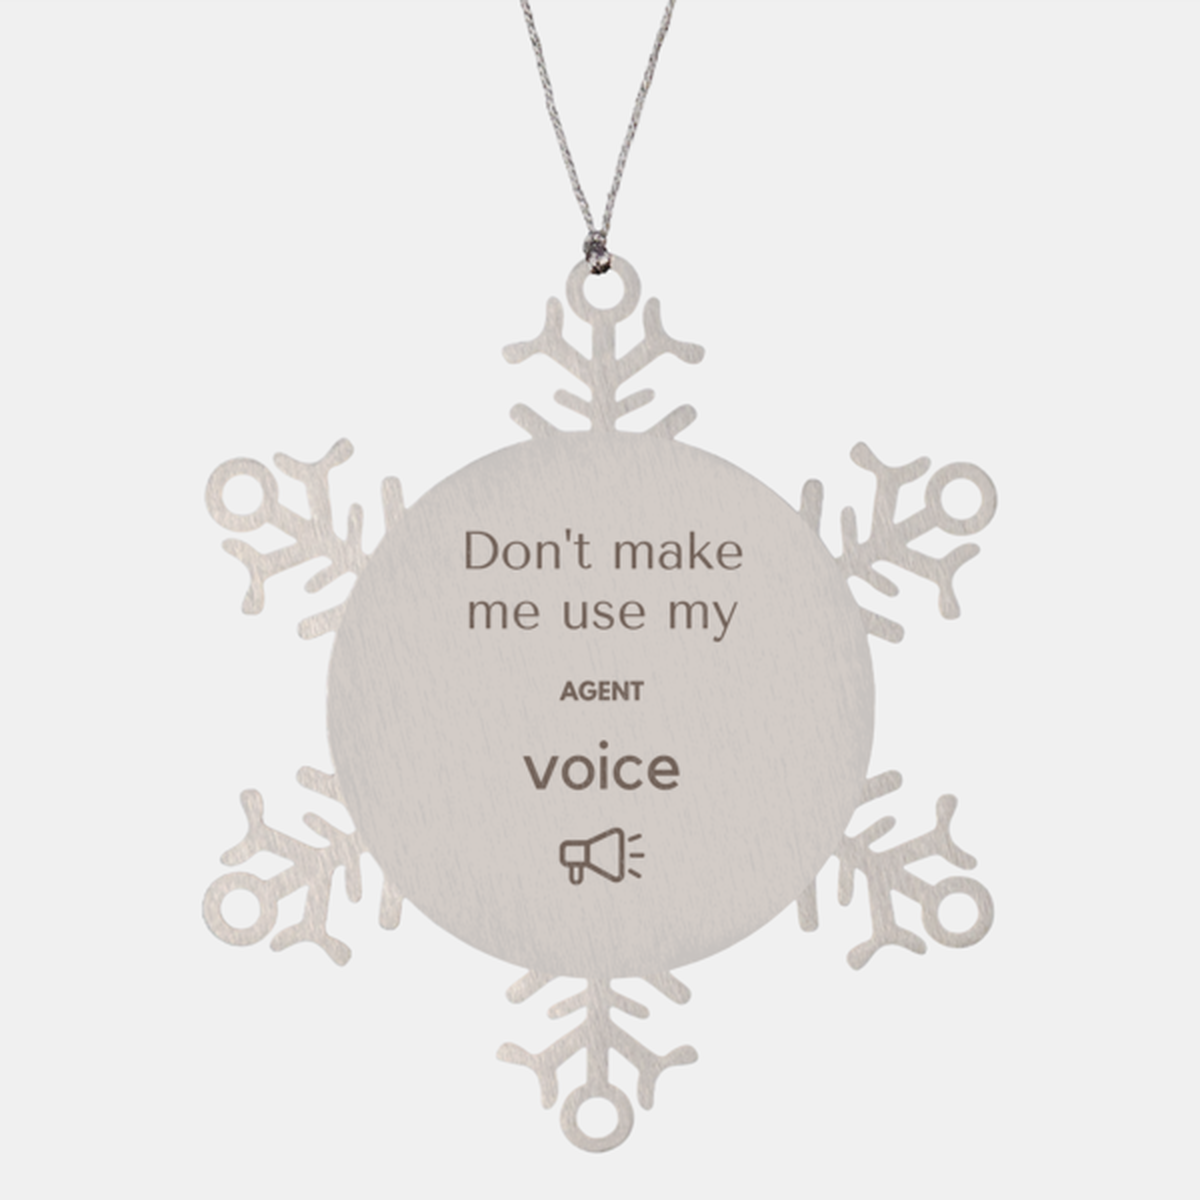 Don't make me use my Agent voice, Sarcasm Agent Ornament Gifts, Christmas Agent Snowflake Ornament Unique Gifts For Agent Coworkers, Men, Women, Colleague, Friends